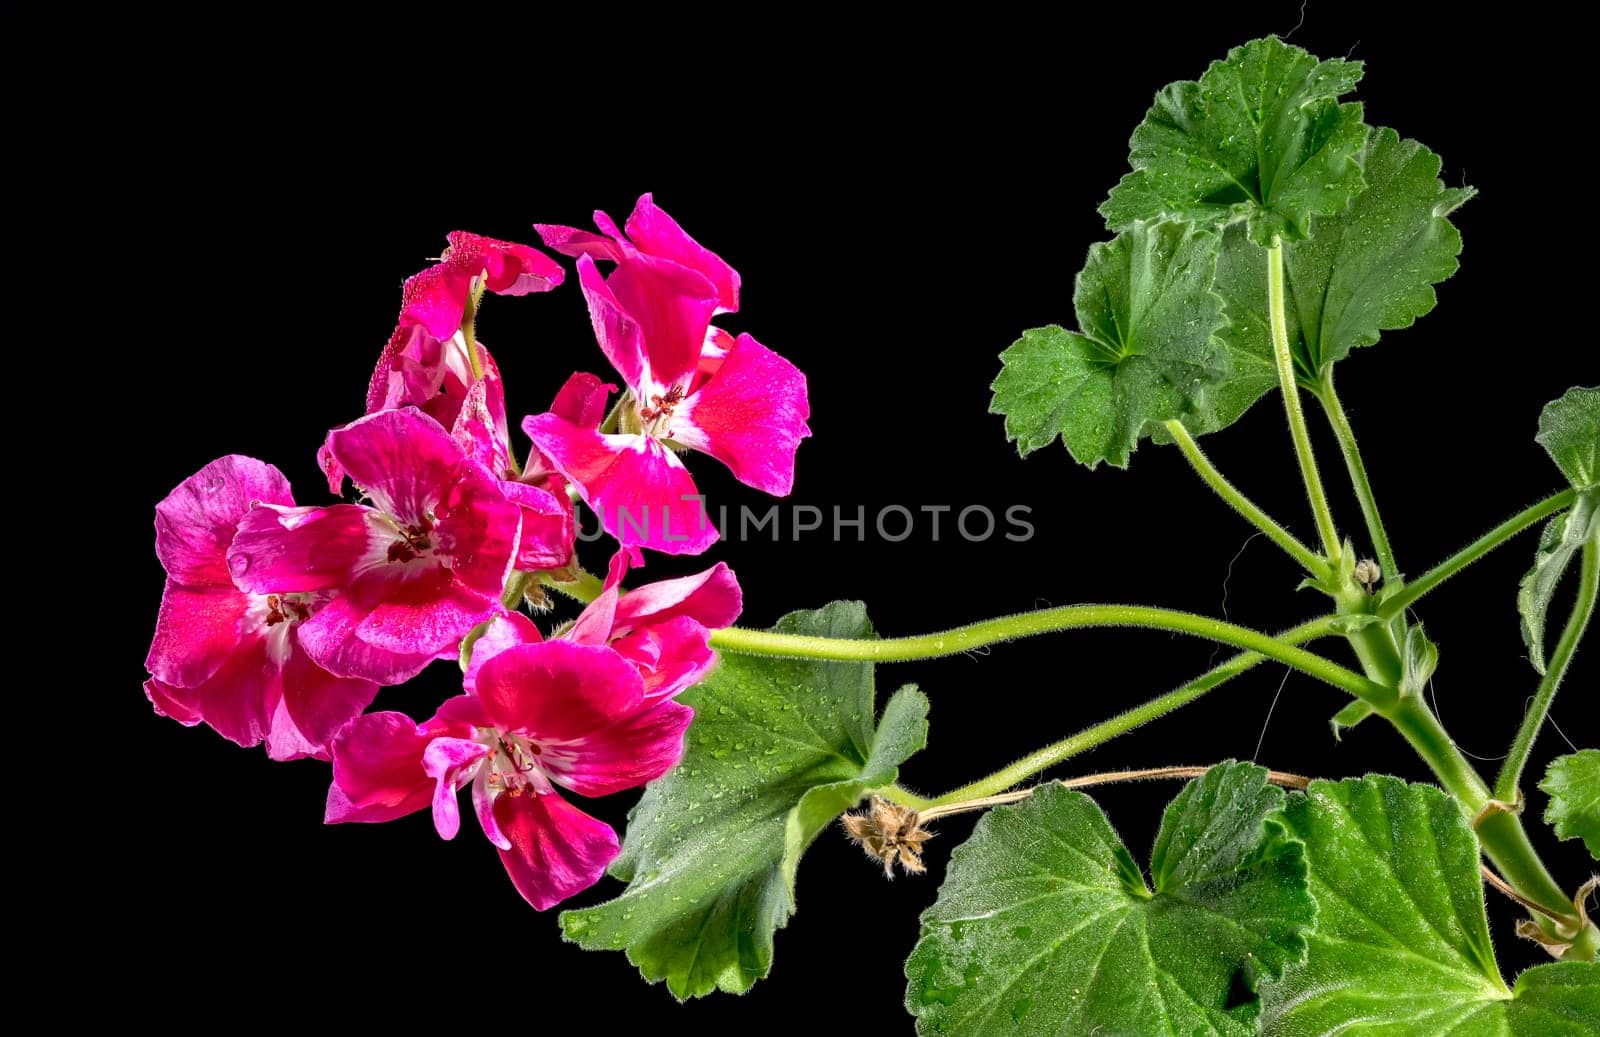 Beautiful Blooming red Pelargonium Toscana Hero flowers on a black background. Flower head close-up.